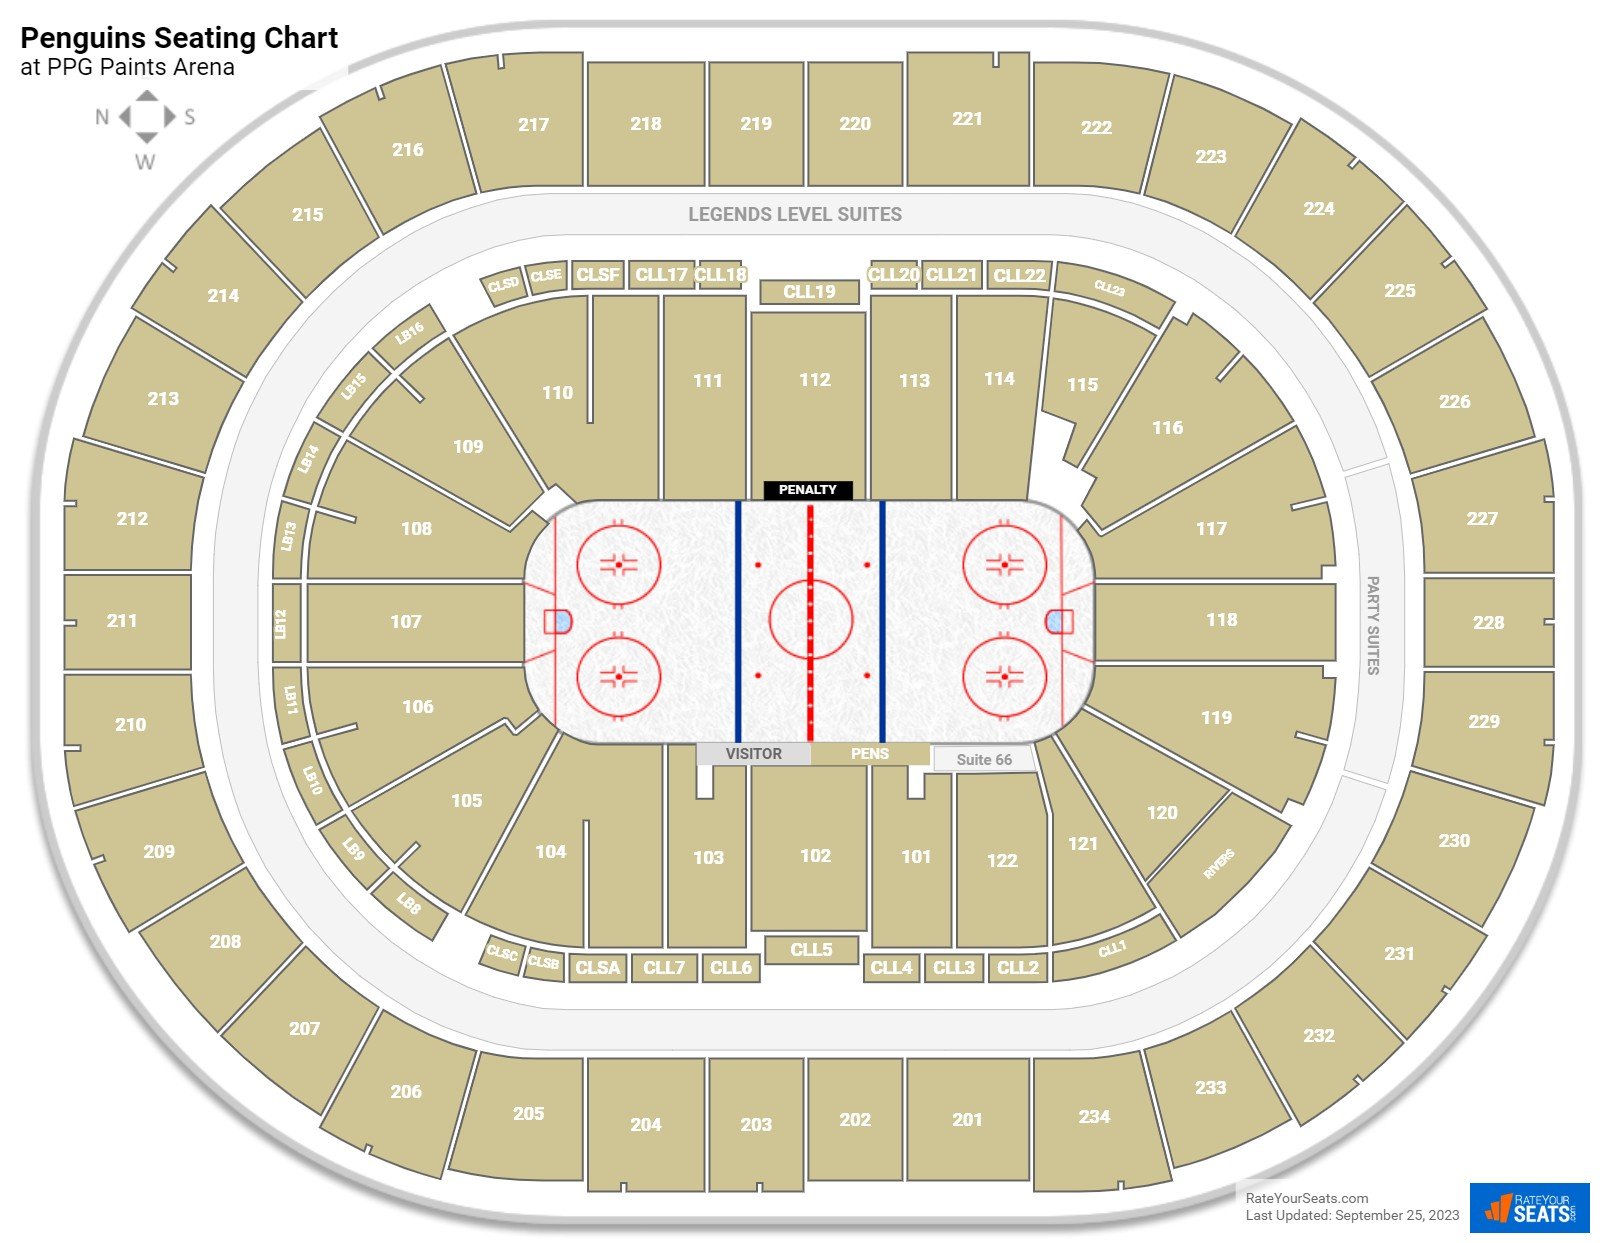 Seating Charts PPG Paints Arena - sadaalomma.com